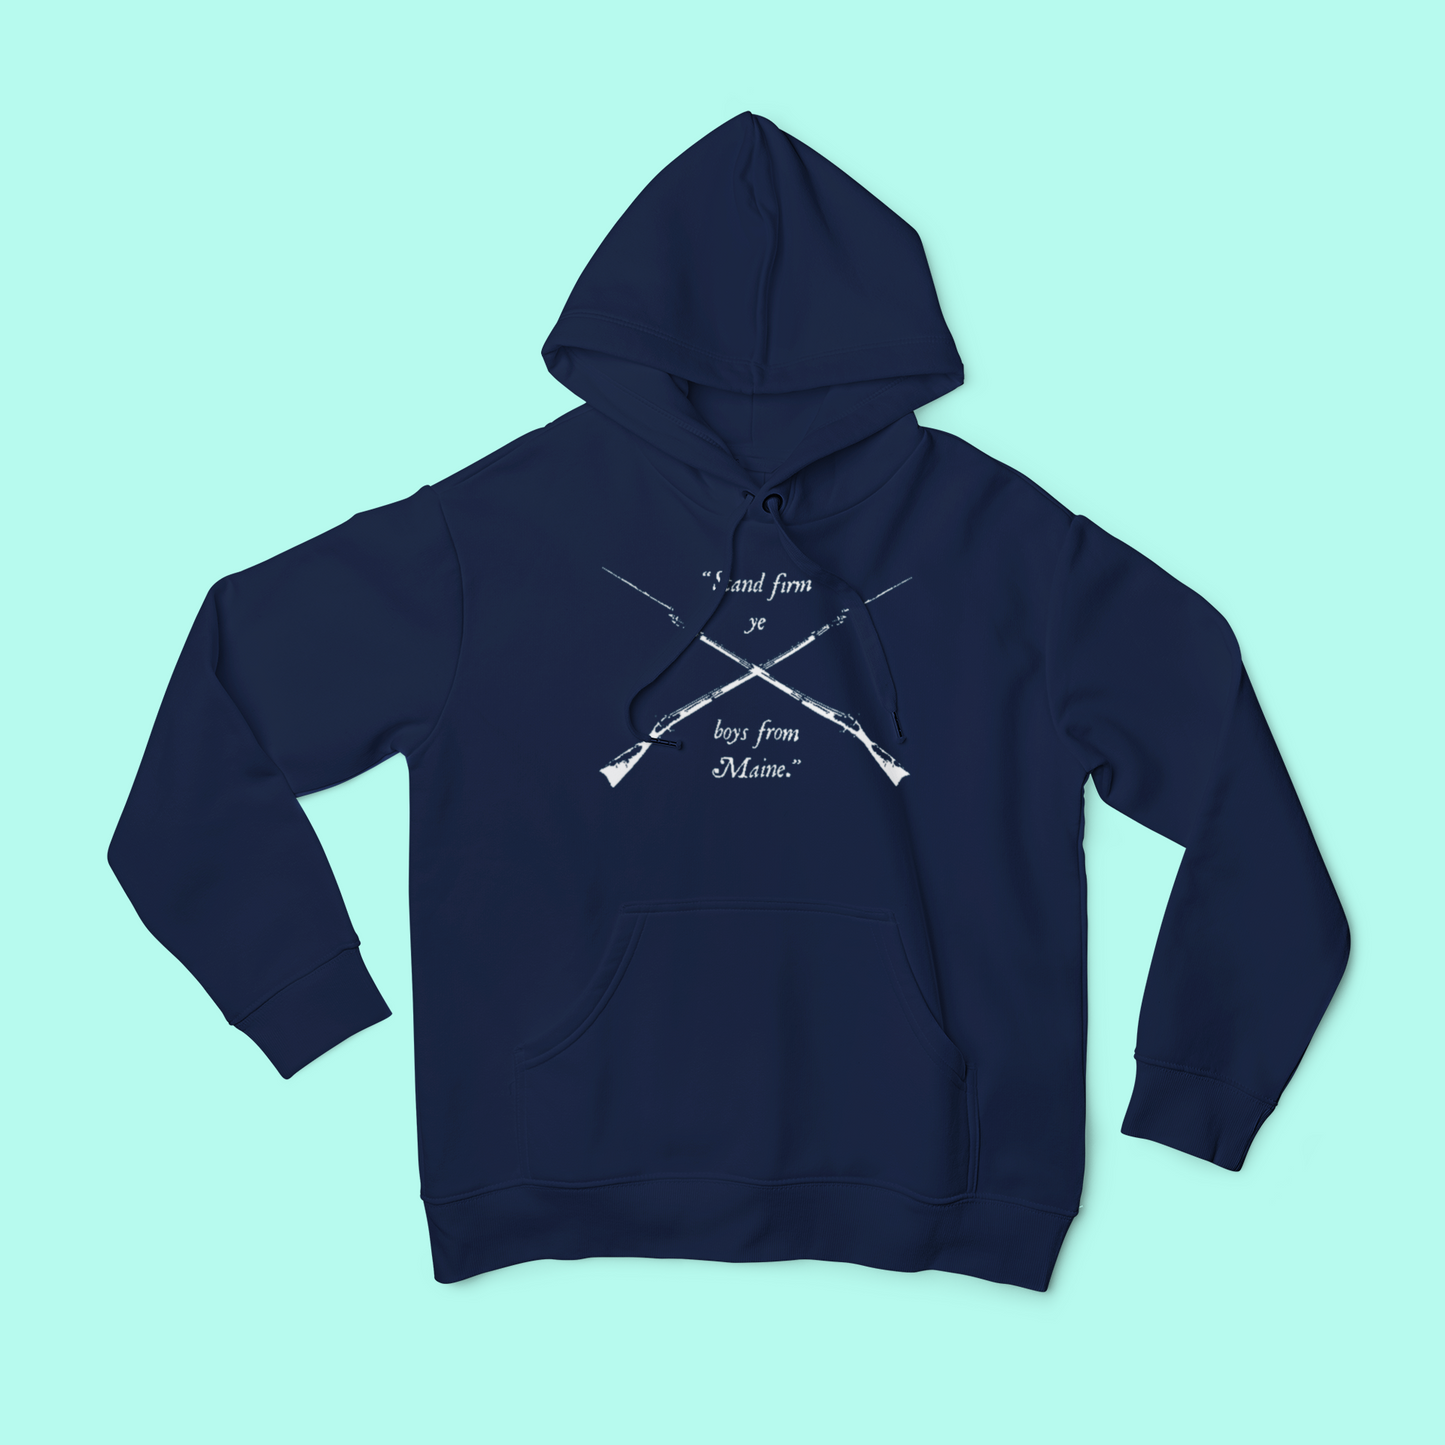 Stand Firm Ye Boys From Maine Men's  Hoodie